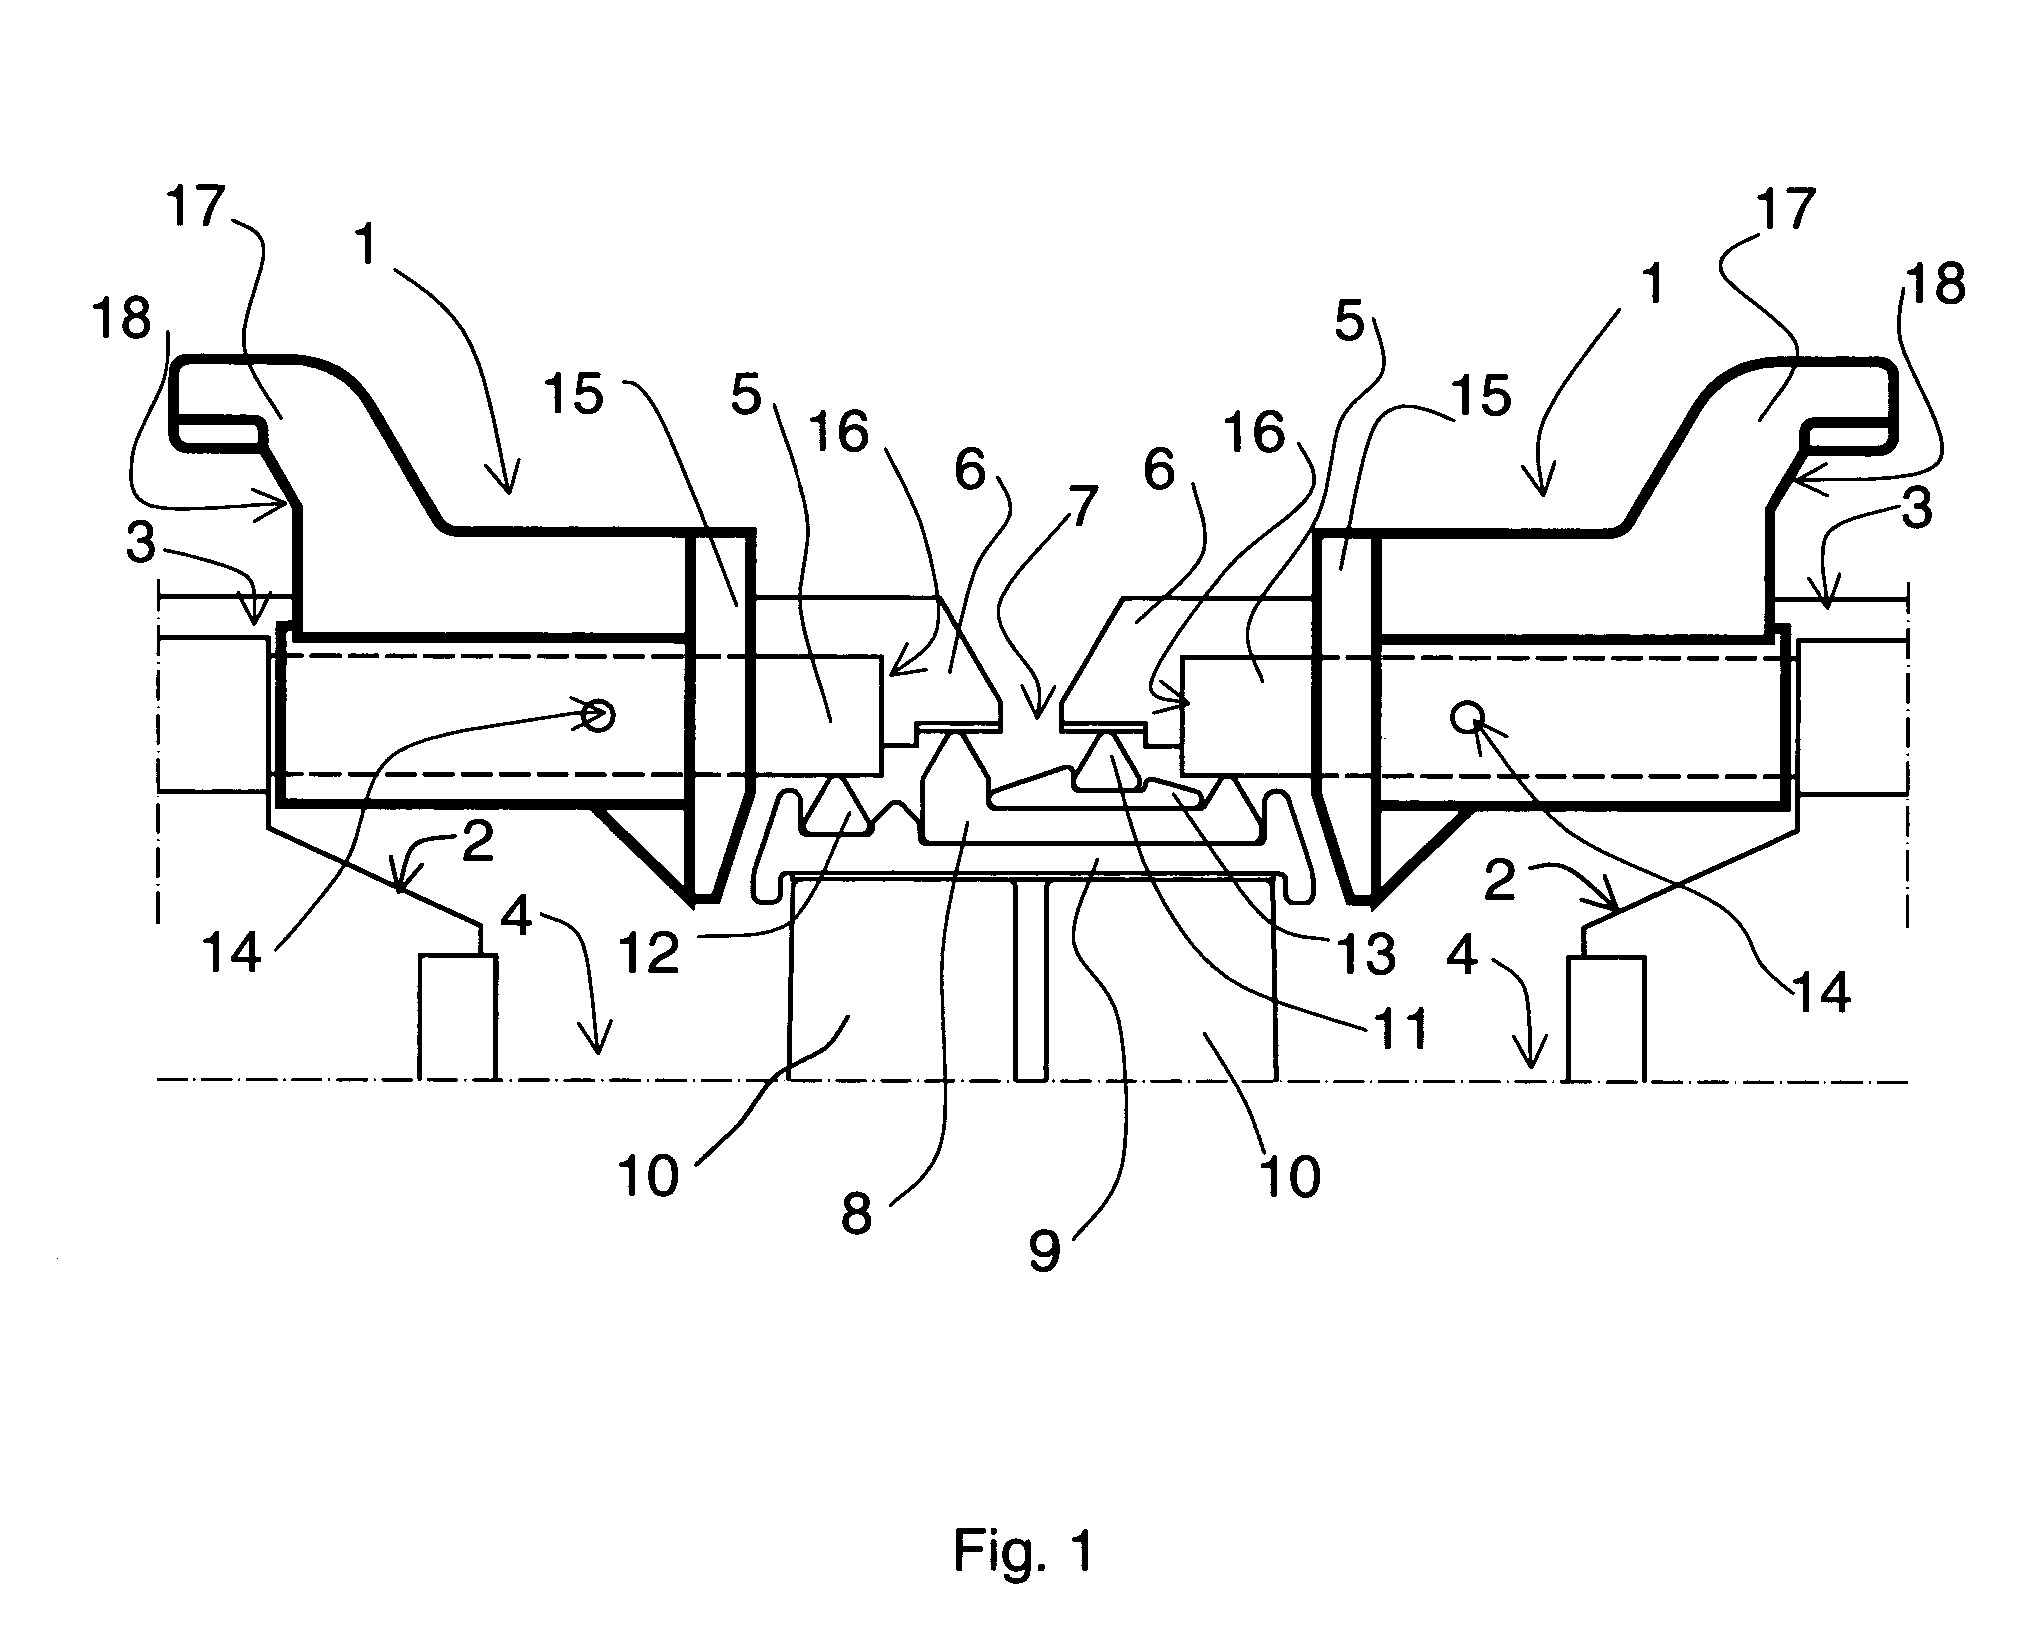 Transfer and insulation device for electrolysis